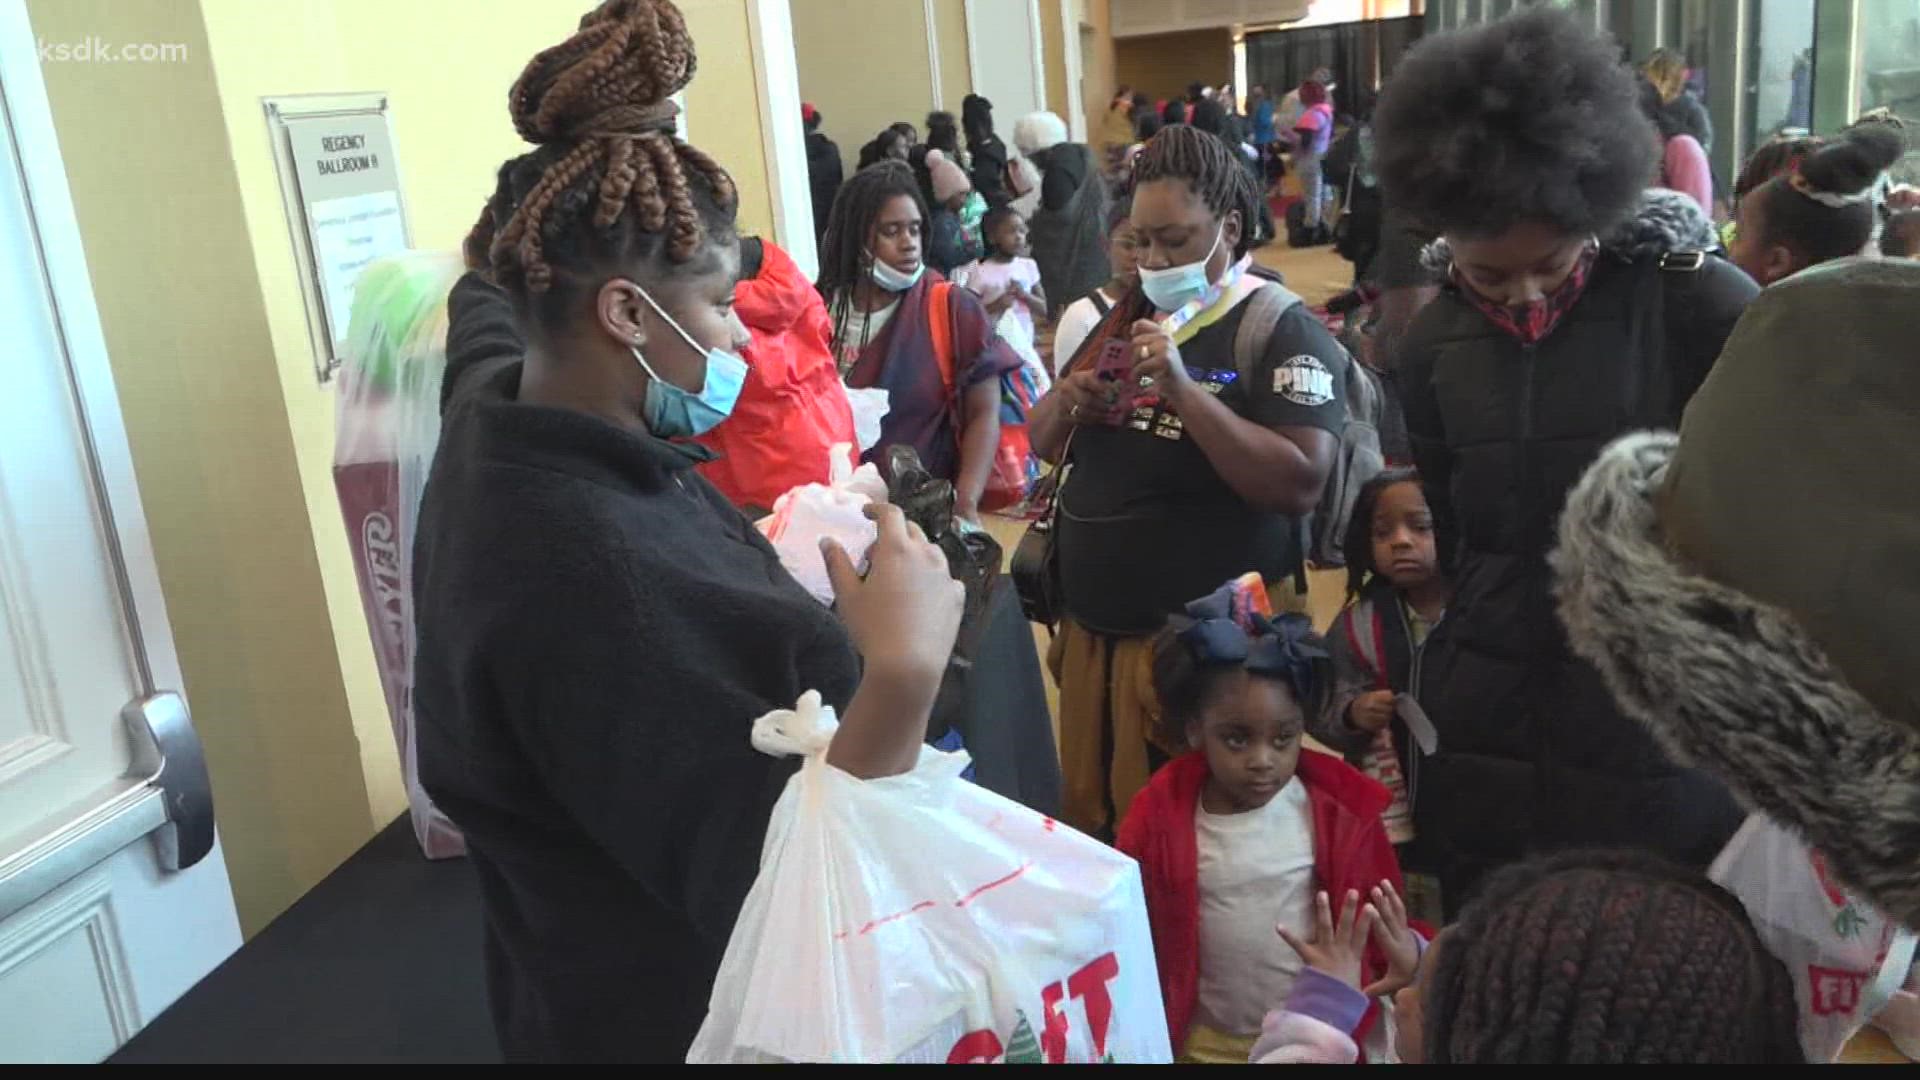 Christmas came early for more than 1,000 families in the St. Louis area at the Union Station Hotel on Sunday.